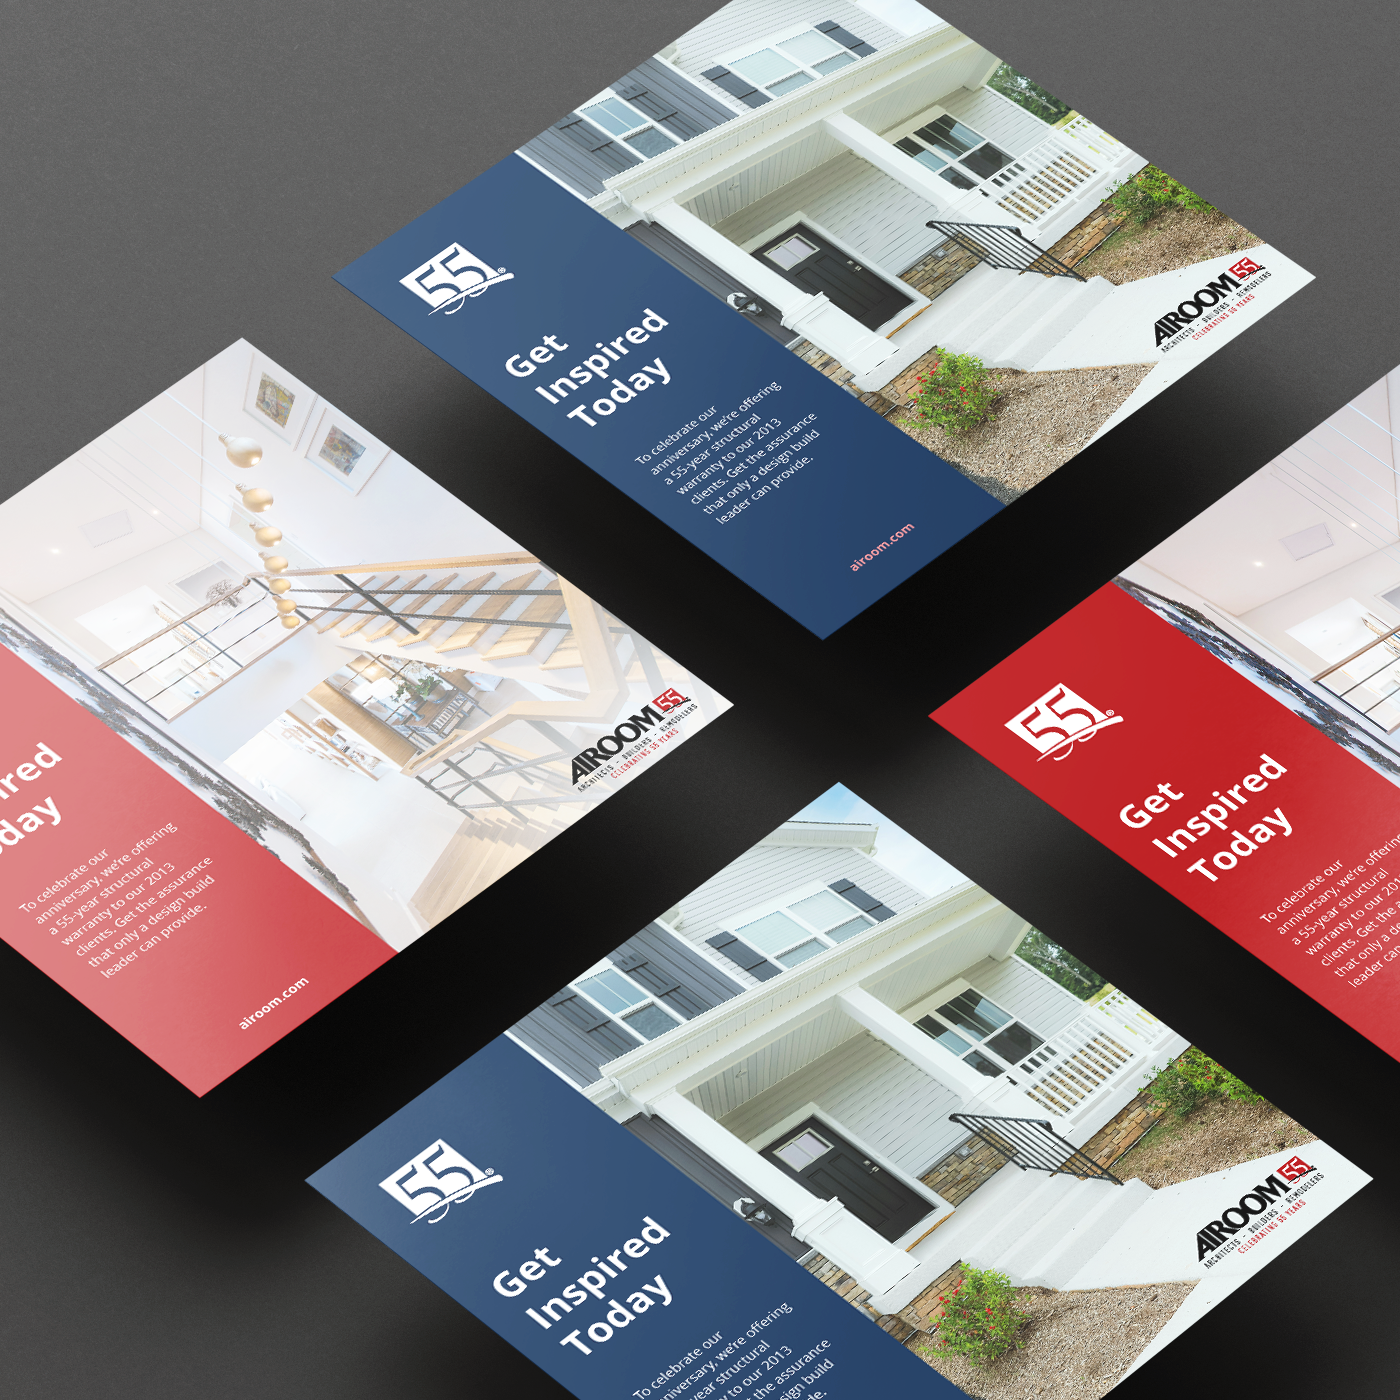 Ad designs for a home and architecture home remodeling build company.